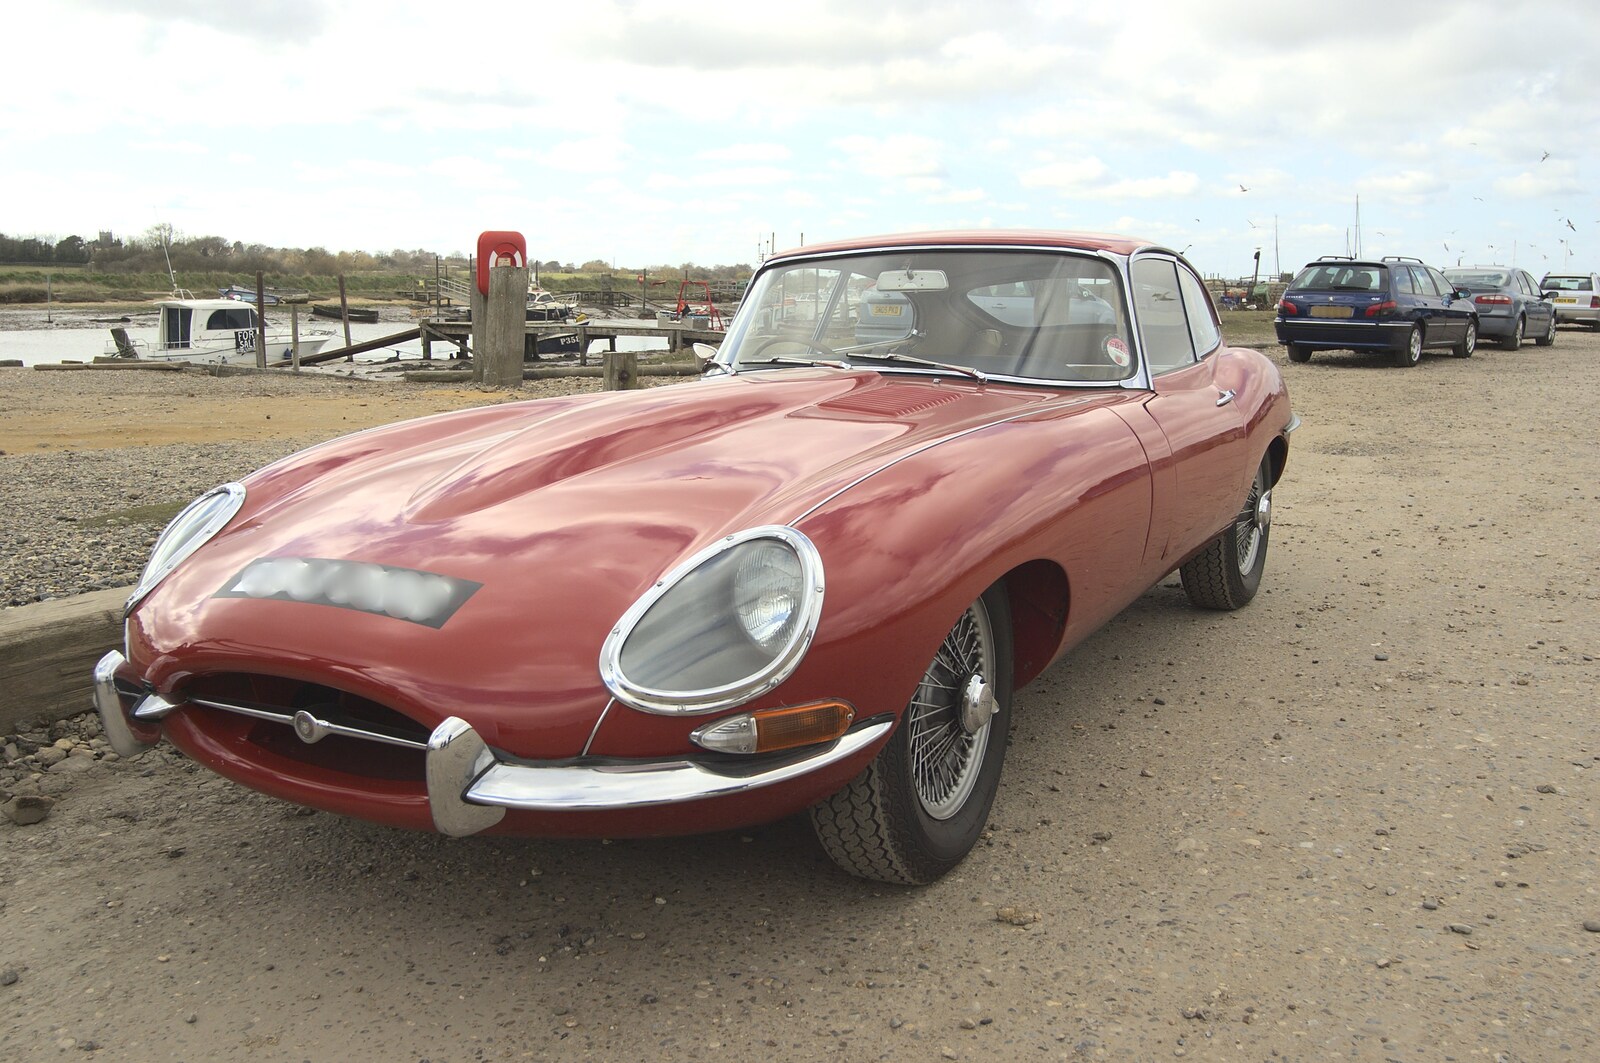 Rob's E-Type Jaguar from Stupid Volcanic Ash: Southwold and Stuston Farm Shop, Suffolk - 18th April 2010